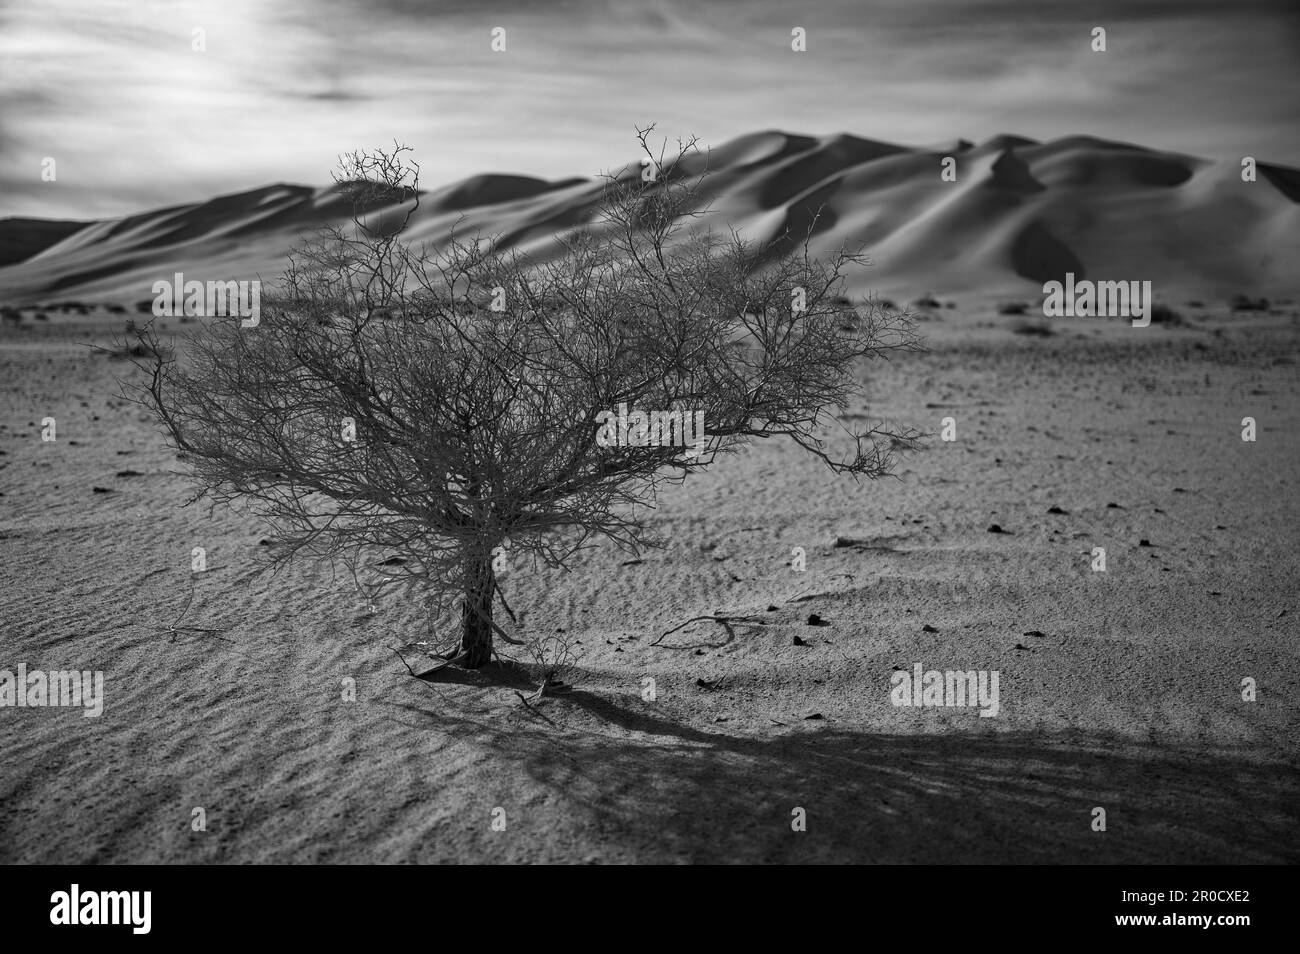 A greyscale of a solitary desert tree amidst an arid landscape, Eureka Dunes, Death Valley Stock Photo